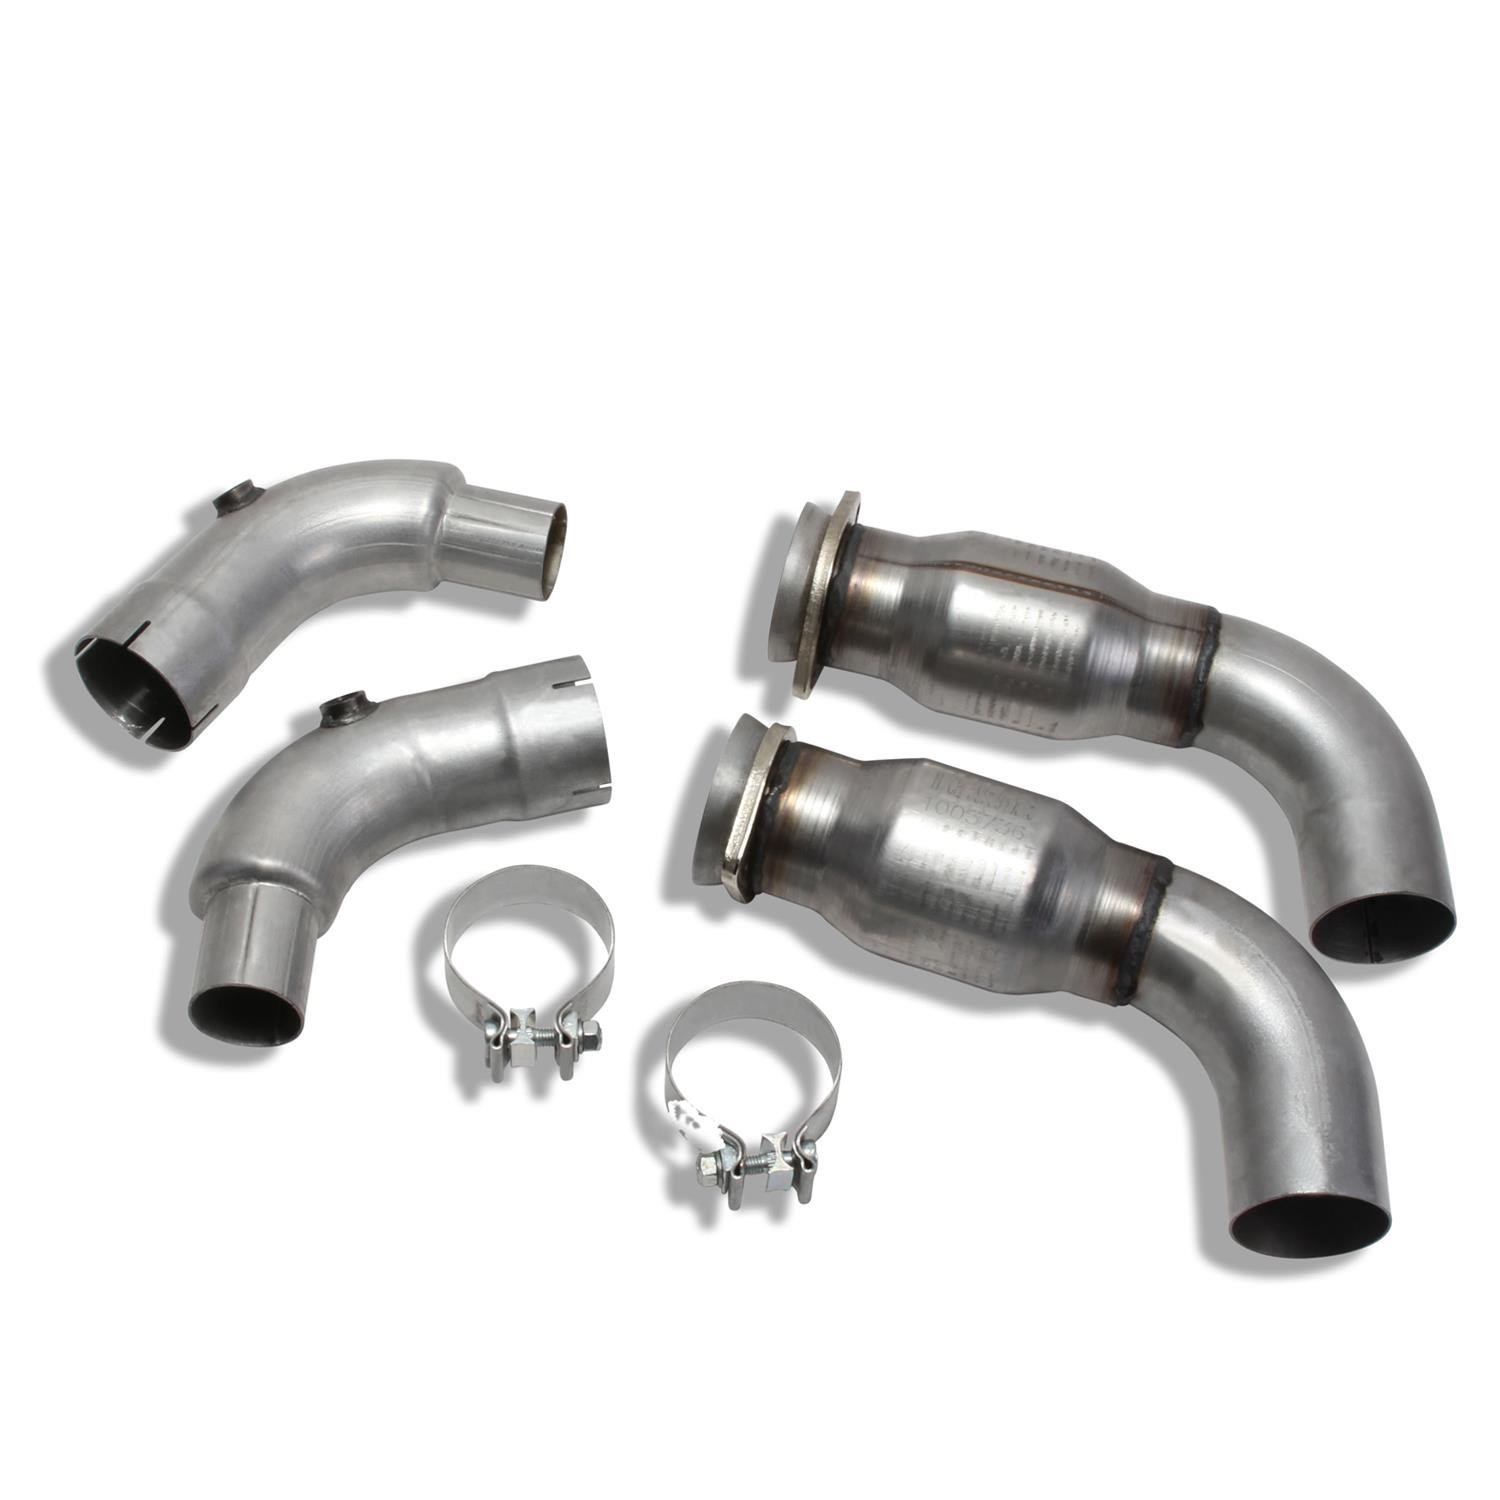 Short Mid-Pipe with Catalytic Converters 2006-2018 Dodge Challenger, Charger 6.1L / 6.4L and Hellcat 6.2L